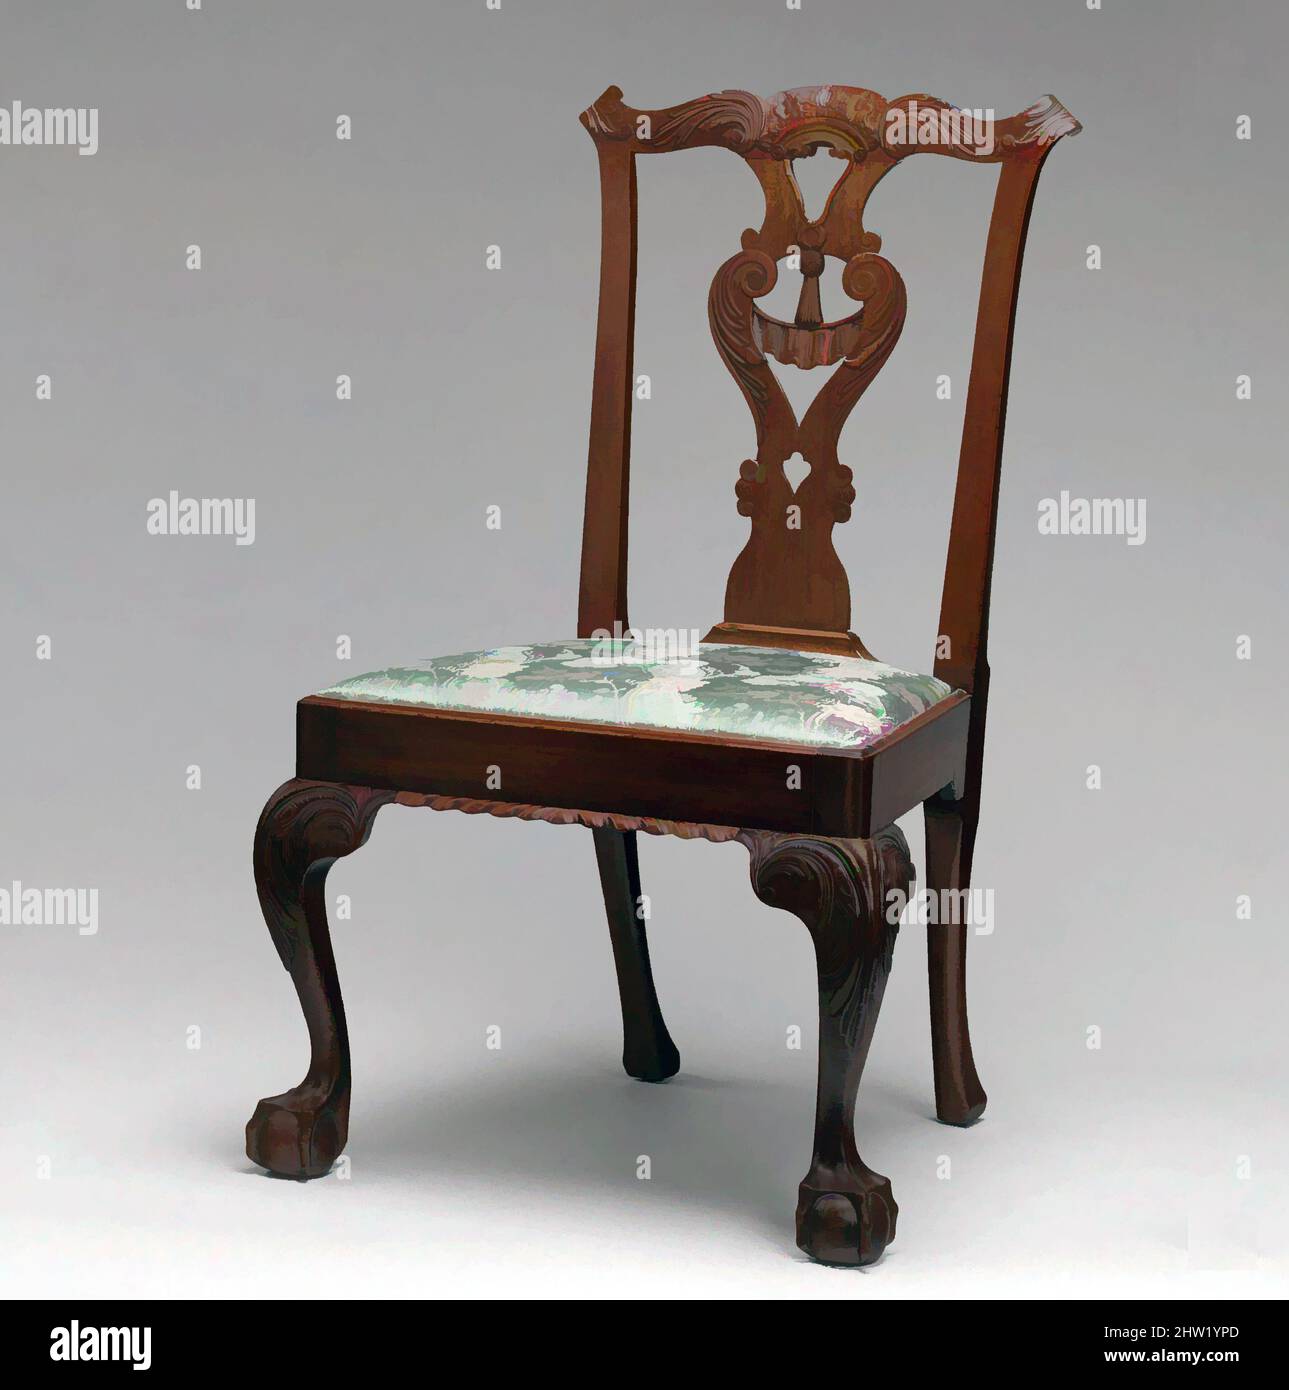 Art inspired by Side Chair, 1765–75, Made in New York, United States, American, Mahogany, sweet gum, 38 7/8 x 24 1/4 x 22 1/4 in. (98.7 x 61.6 x 56.5 cm), Furniture, Typical New York features, such as the carved tassel-and-ruffle design in the splat, the gadrooned seat rail, and the, Classic works modernized by Artotop with a splash of modernity. Shapes, color and value, eye-catching visual impact on art. Emotions through freedom of artworks in a contemporary way. A timeless message pursuing a wildly creative new direction. Artists turning to the digital medium and creating the Artotop NFT Stock Photo